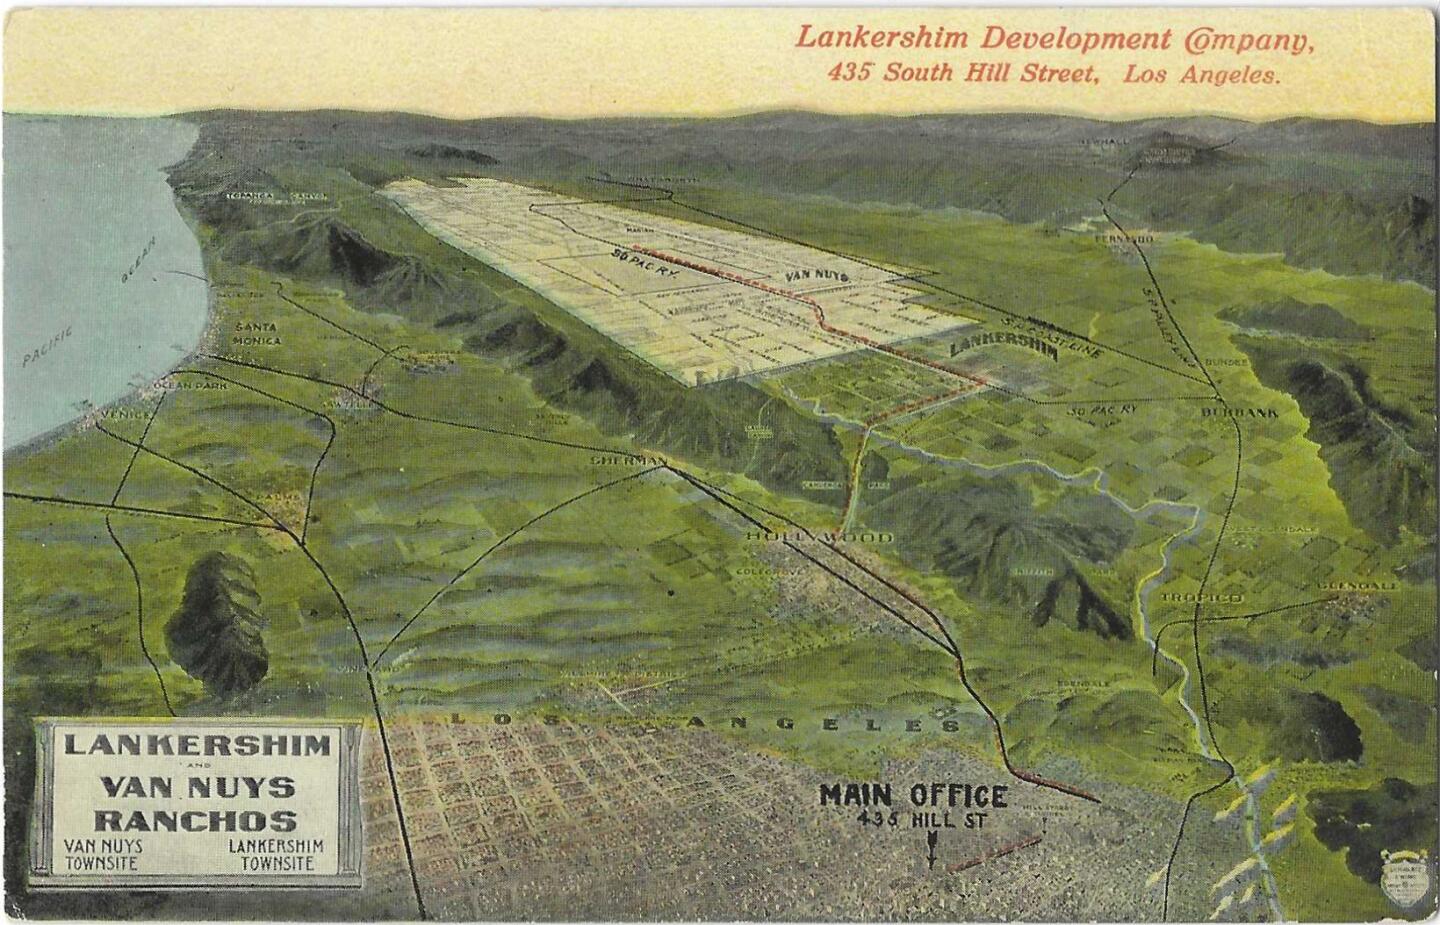 The front of a Lankershim Development Co. postcard